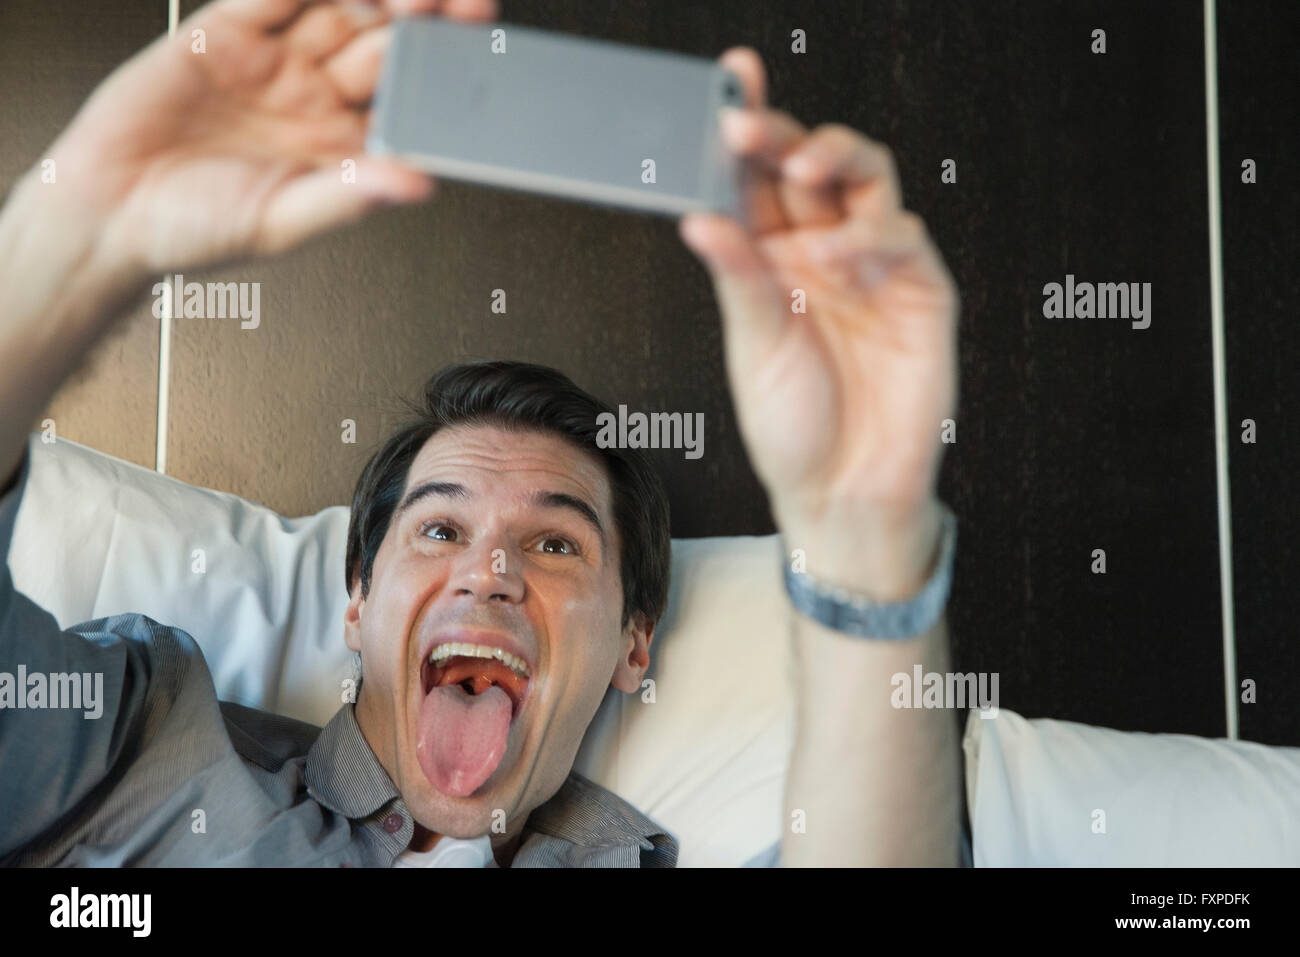 Man using smartphone to take a selfie, sticking out tongue Stock Photo